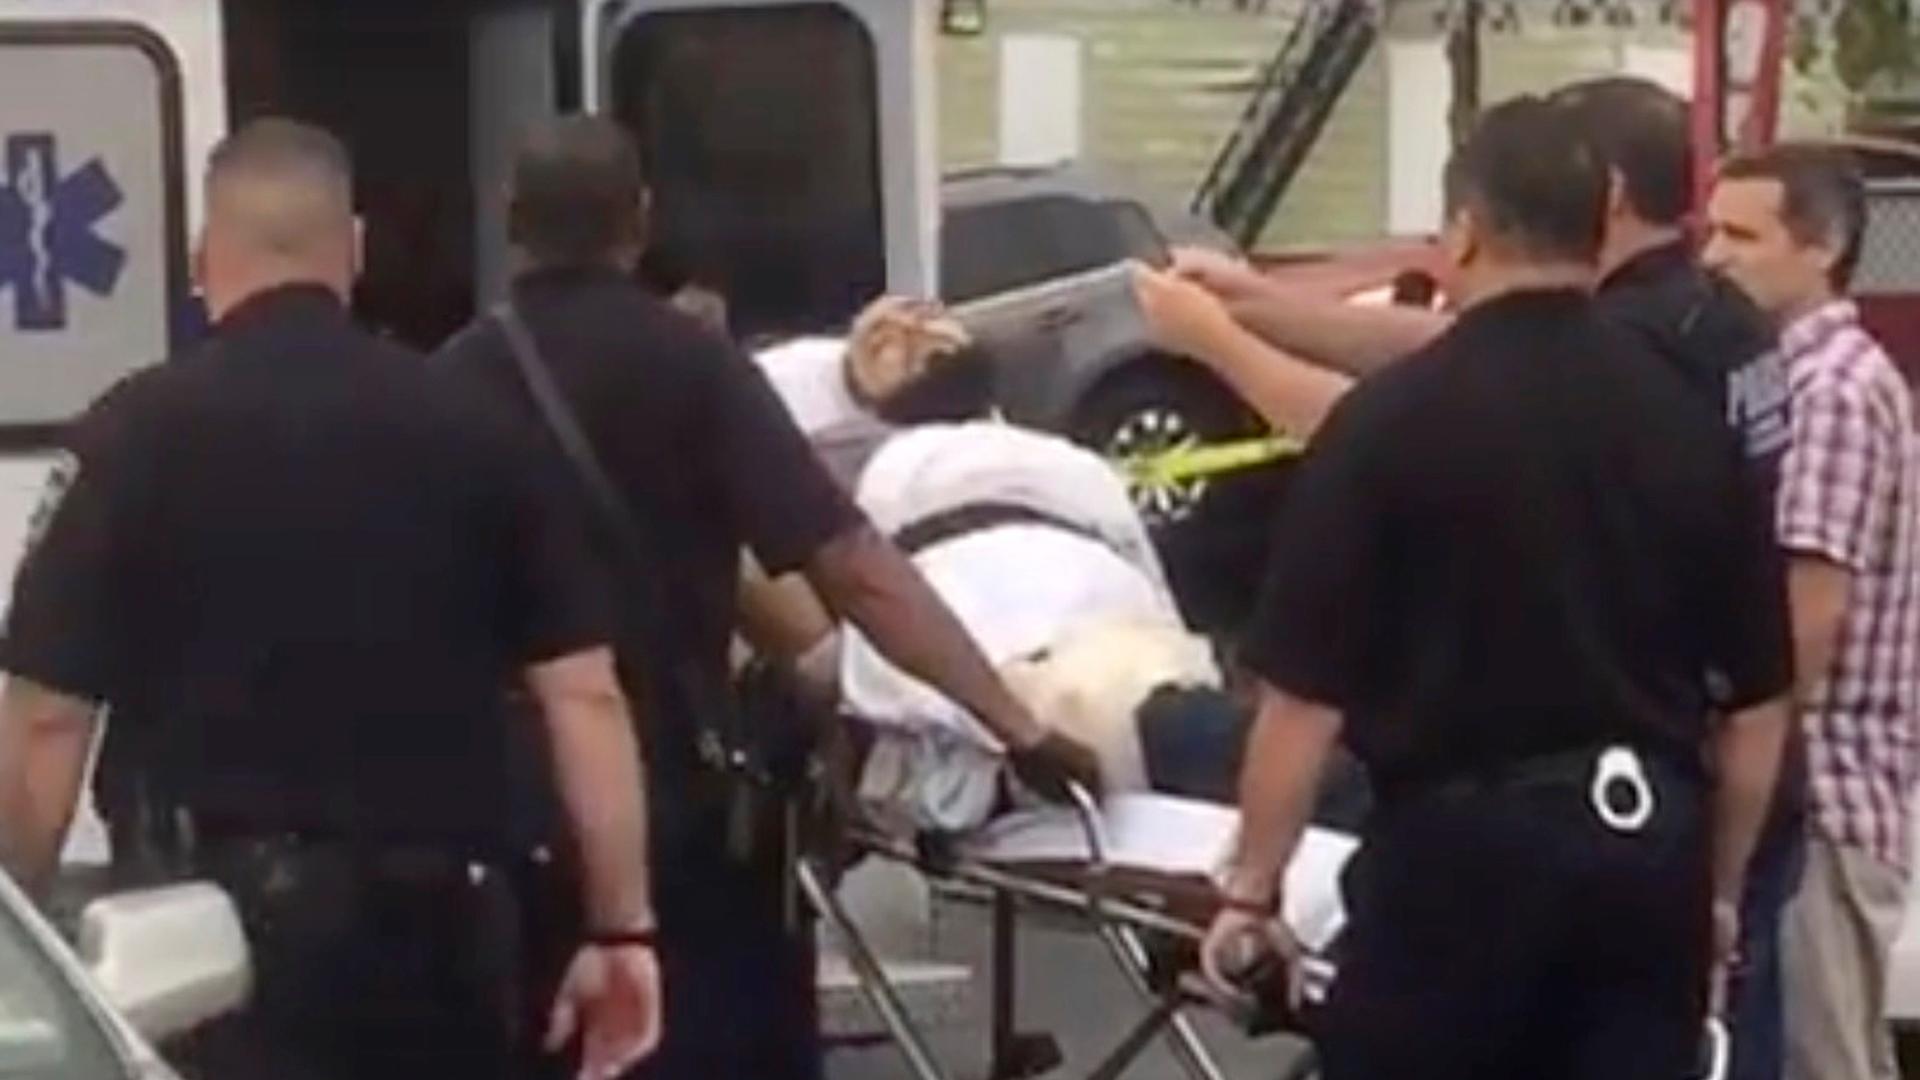 A policeman takes a photo of a man they identify as Ahmad Khan Rahami, who is wanted for questioning in connection with an explosion in New York City, as he is placed into an ambulance in Linden, New Jersey, in this still image taken from video. 